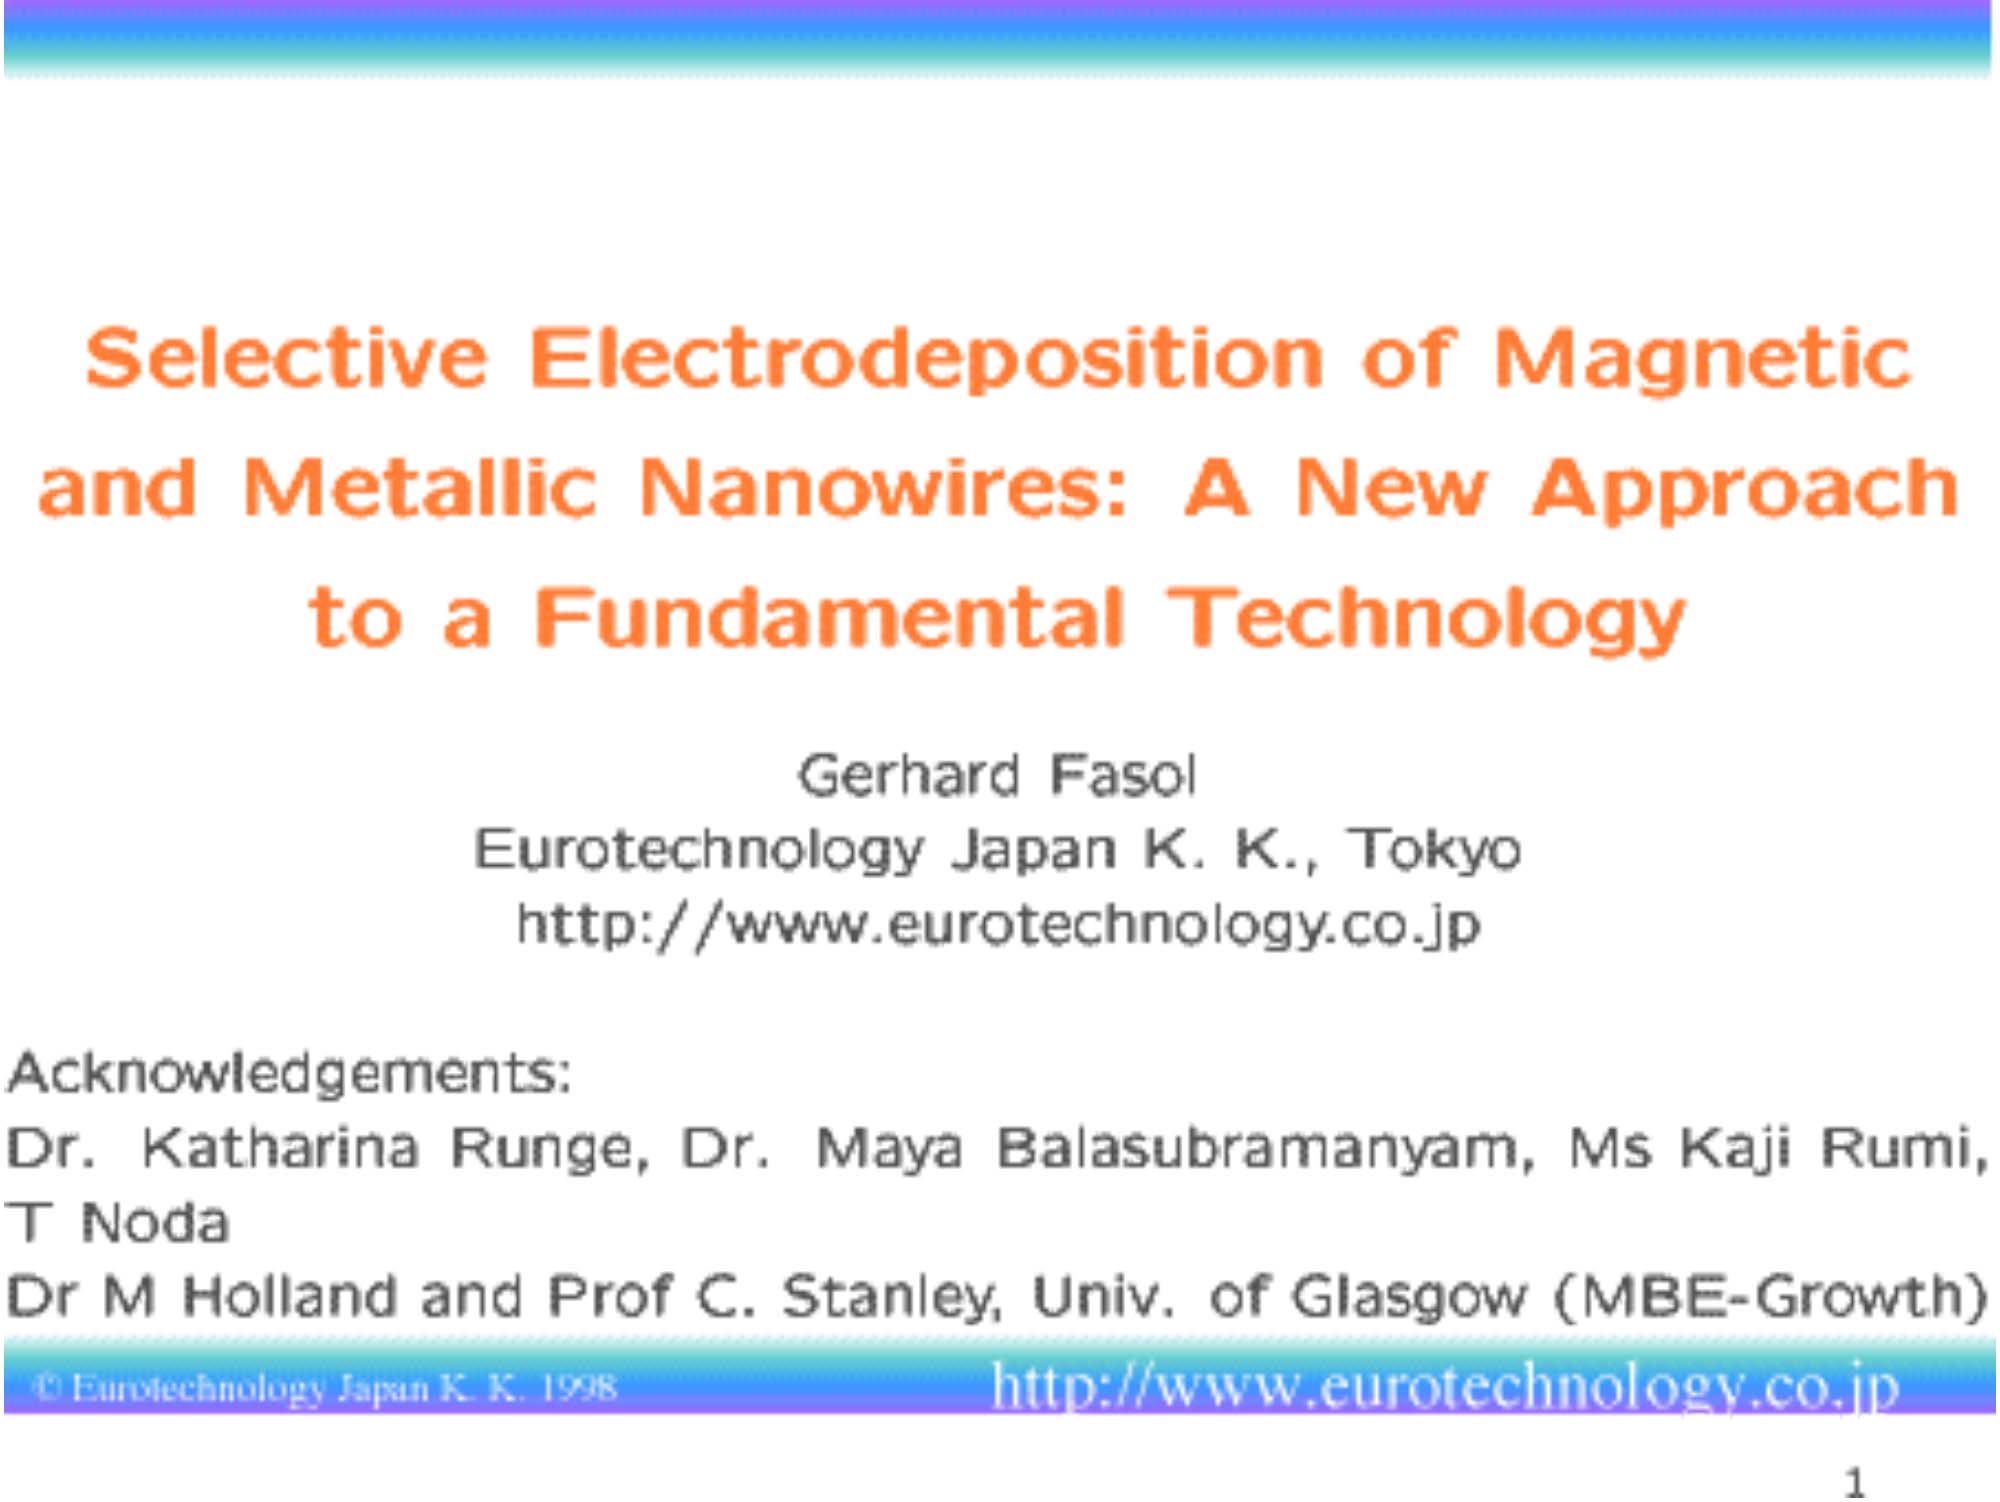 Selective electrodeposition of magnetic and metallic nanowires - A new approach to a fundamental technology